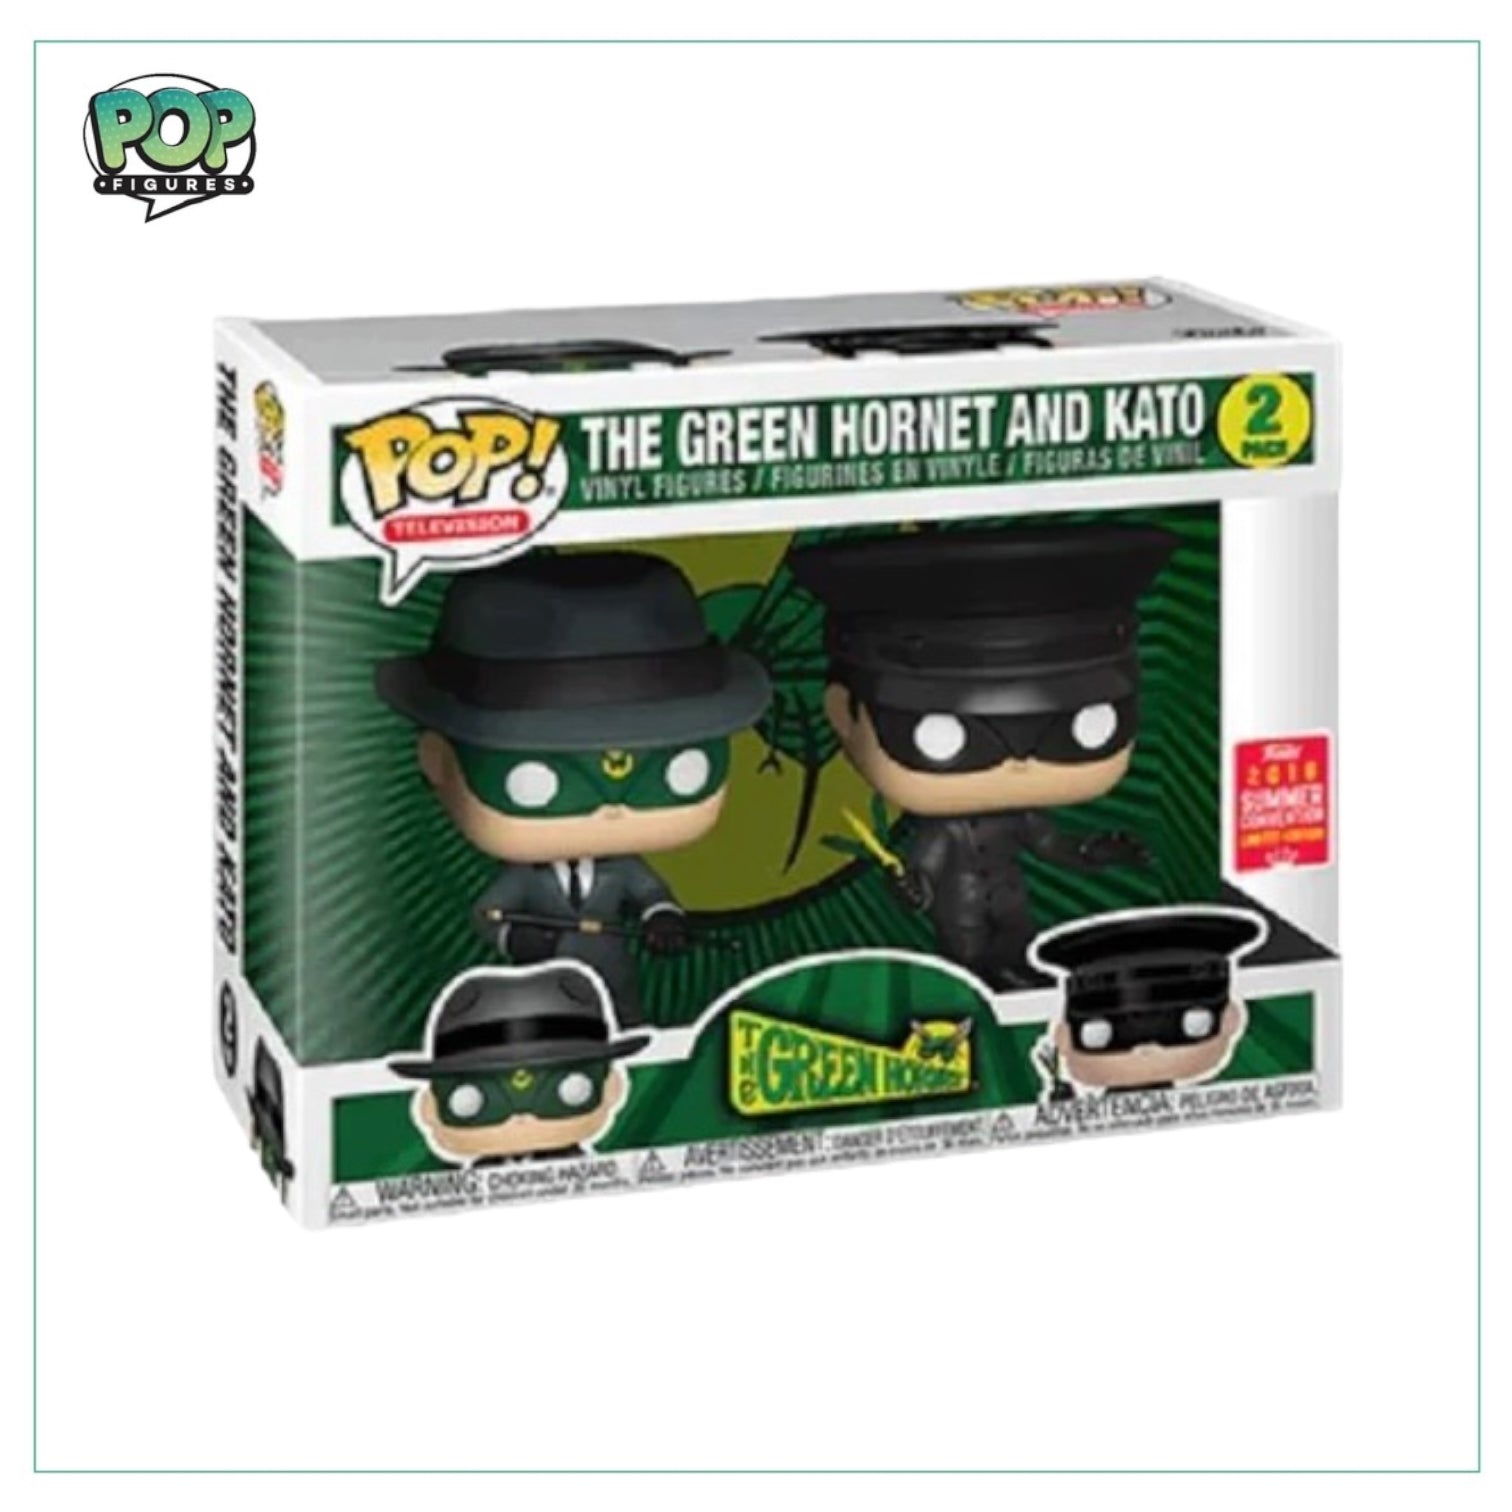 The Green Hornet & Kato Deluxe Funko 2 Pack! - The Green Hornet - 2018 SDCC Shared Exclusive